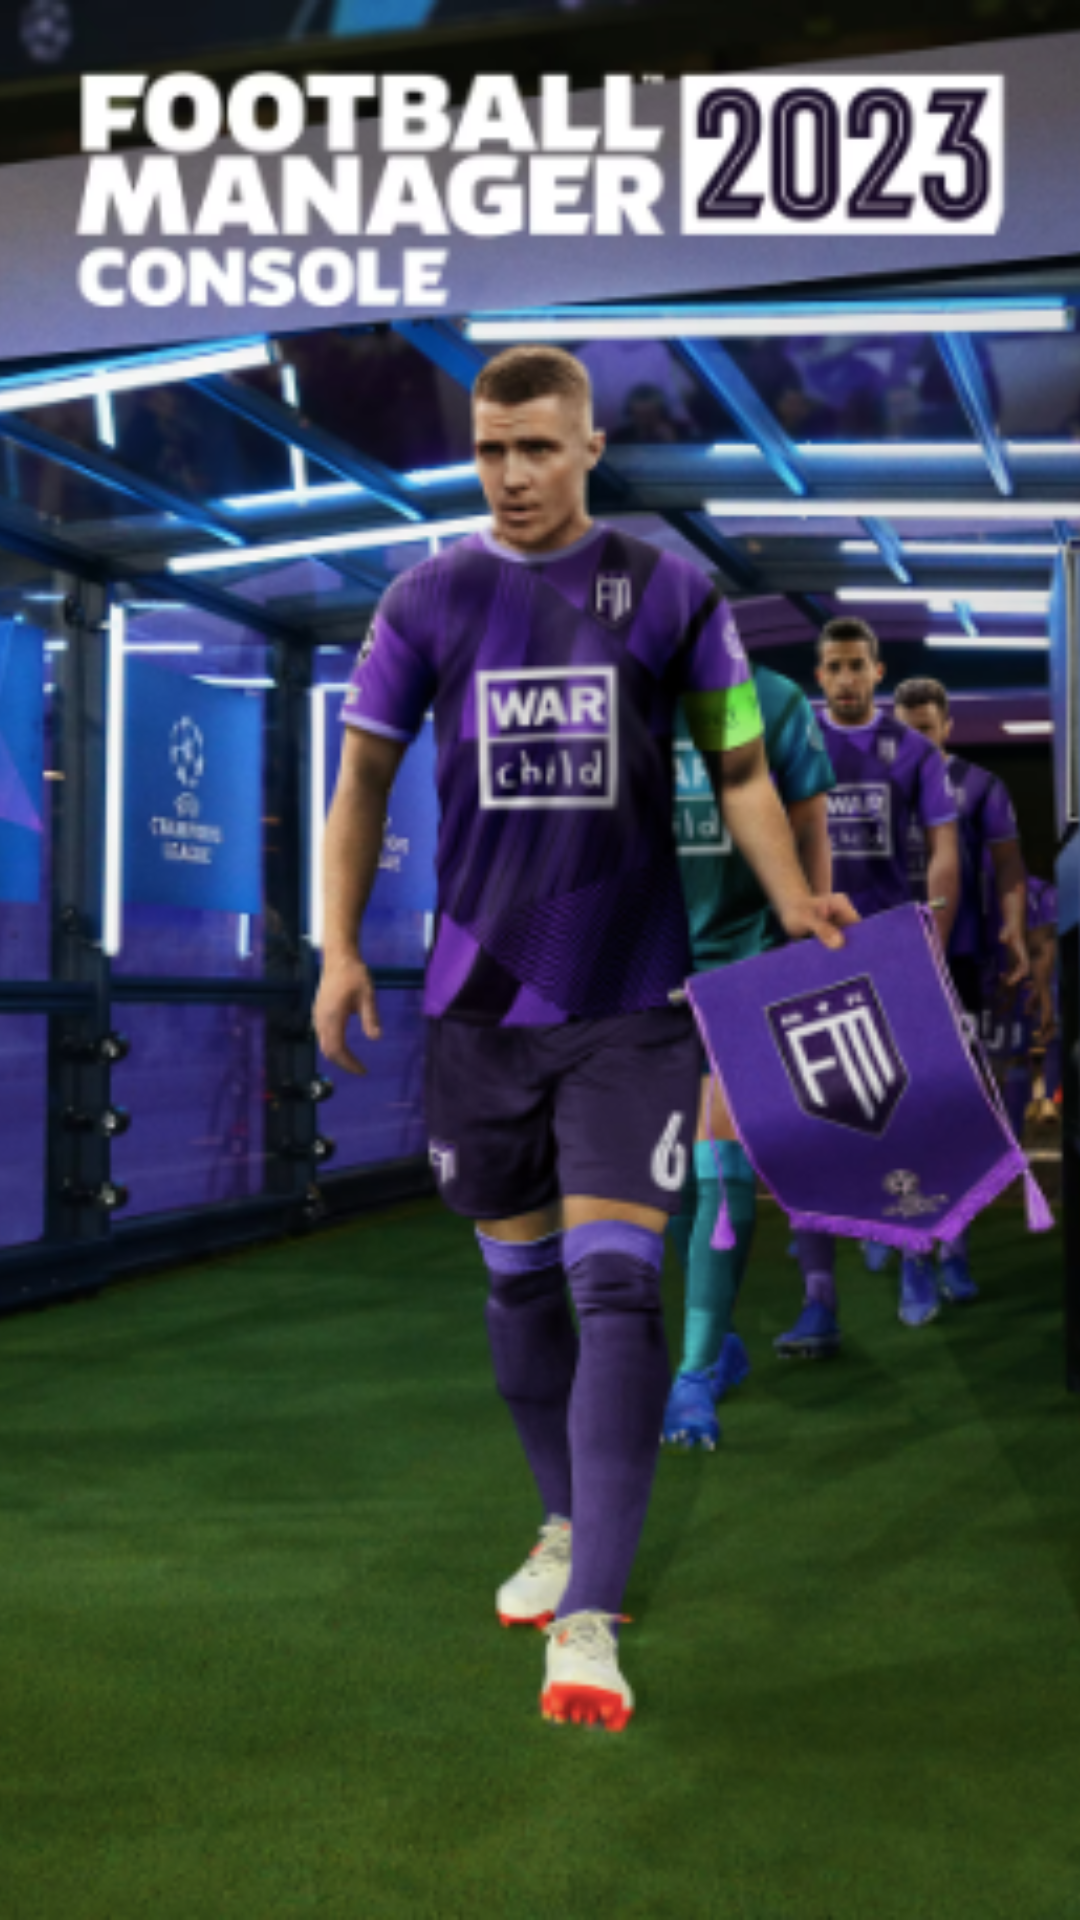 Get Football Manager 2023 with Prime Gaming in September